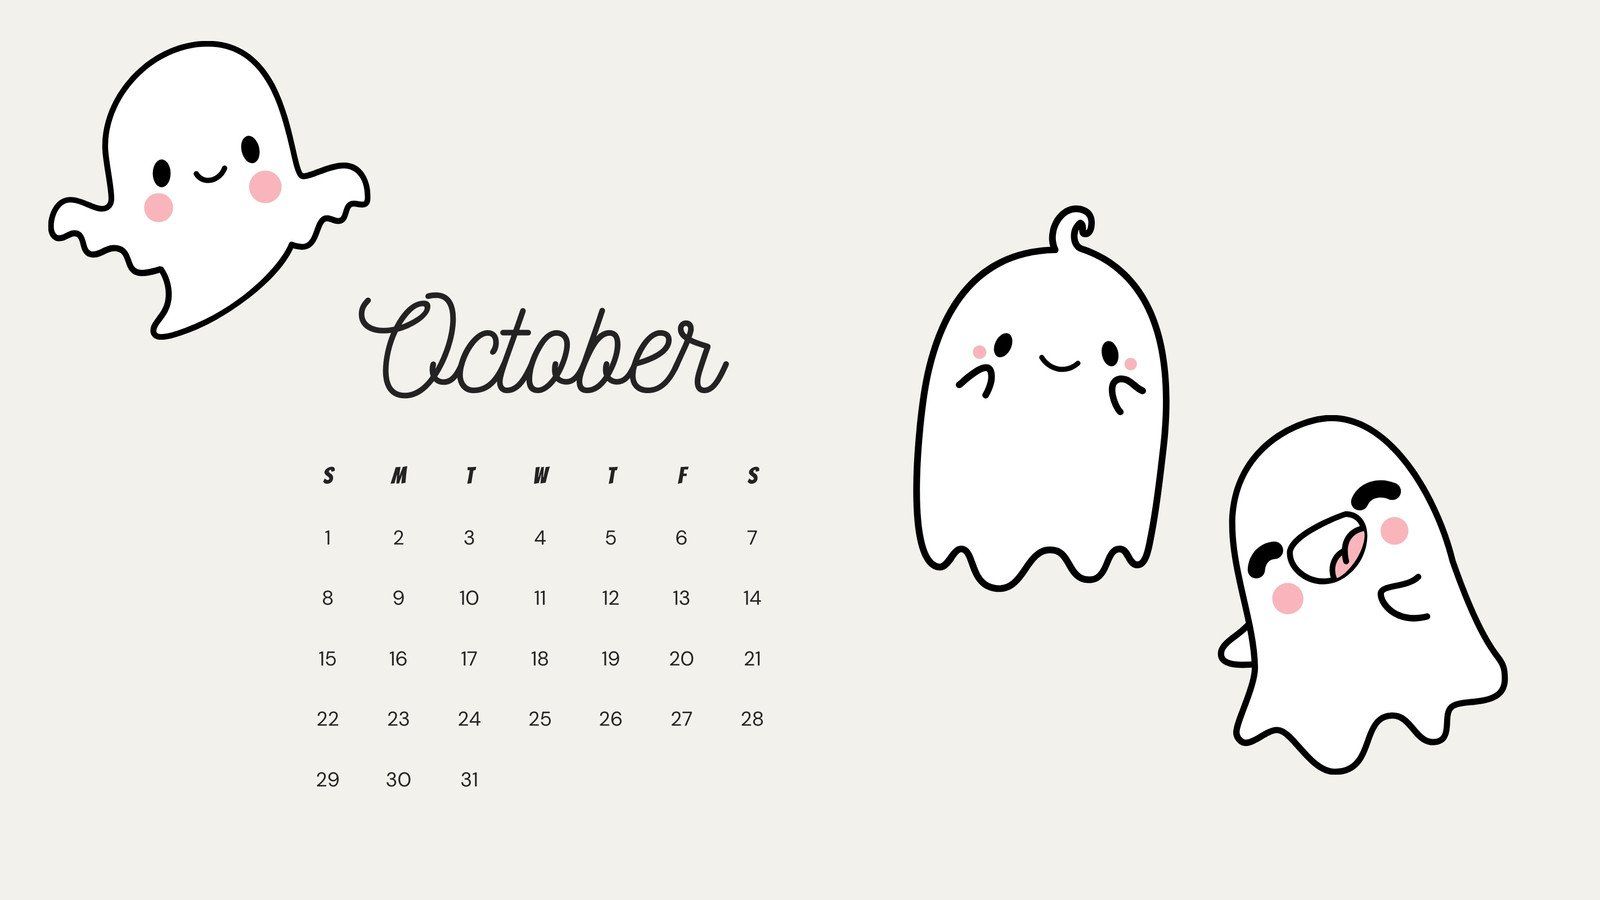 October 2021 calendar with cute ghost illustration. The calendar is in English and starts on Sunday. - Easter